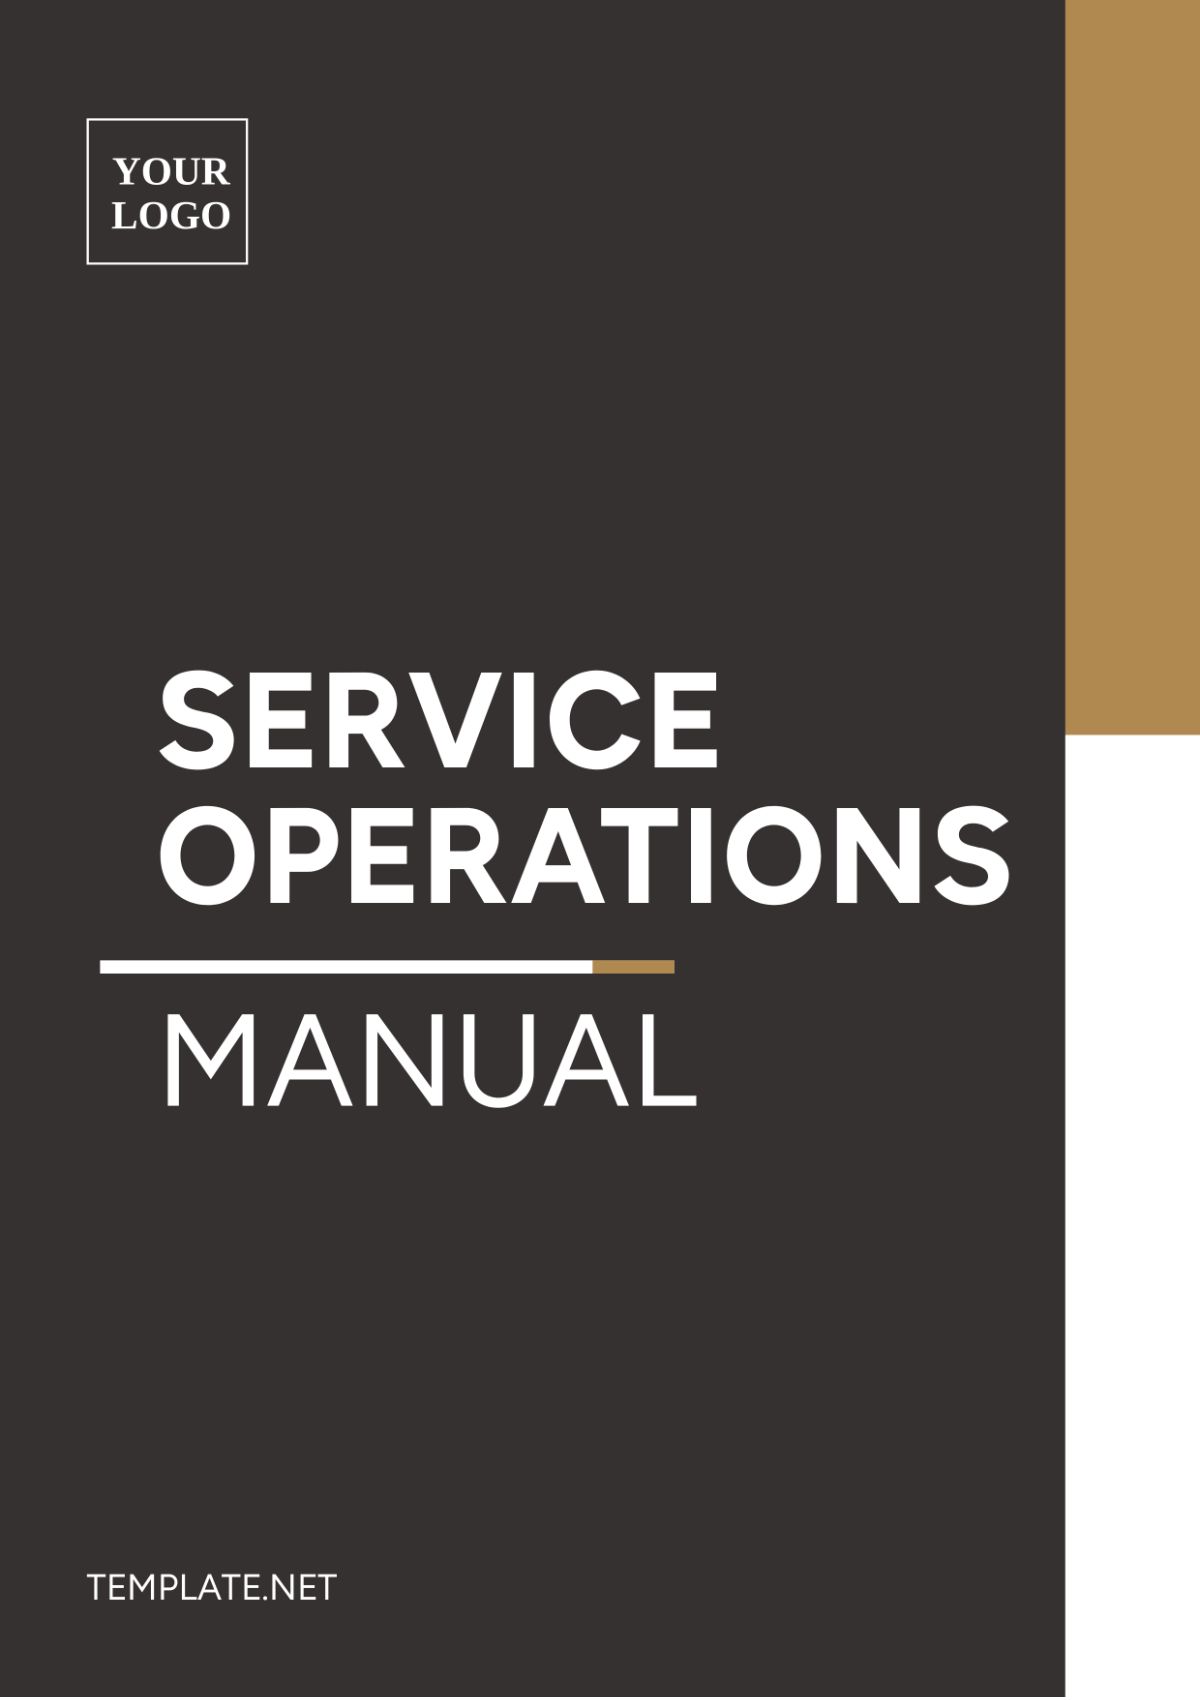 Service Operations Manual Template